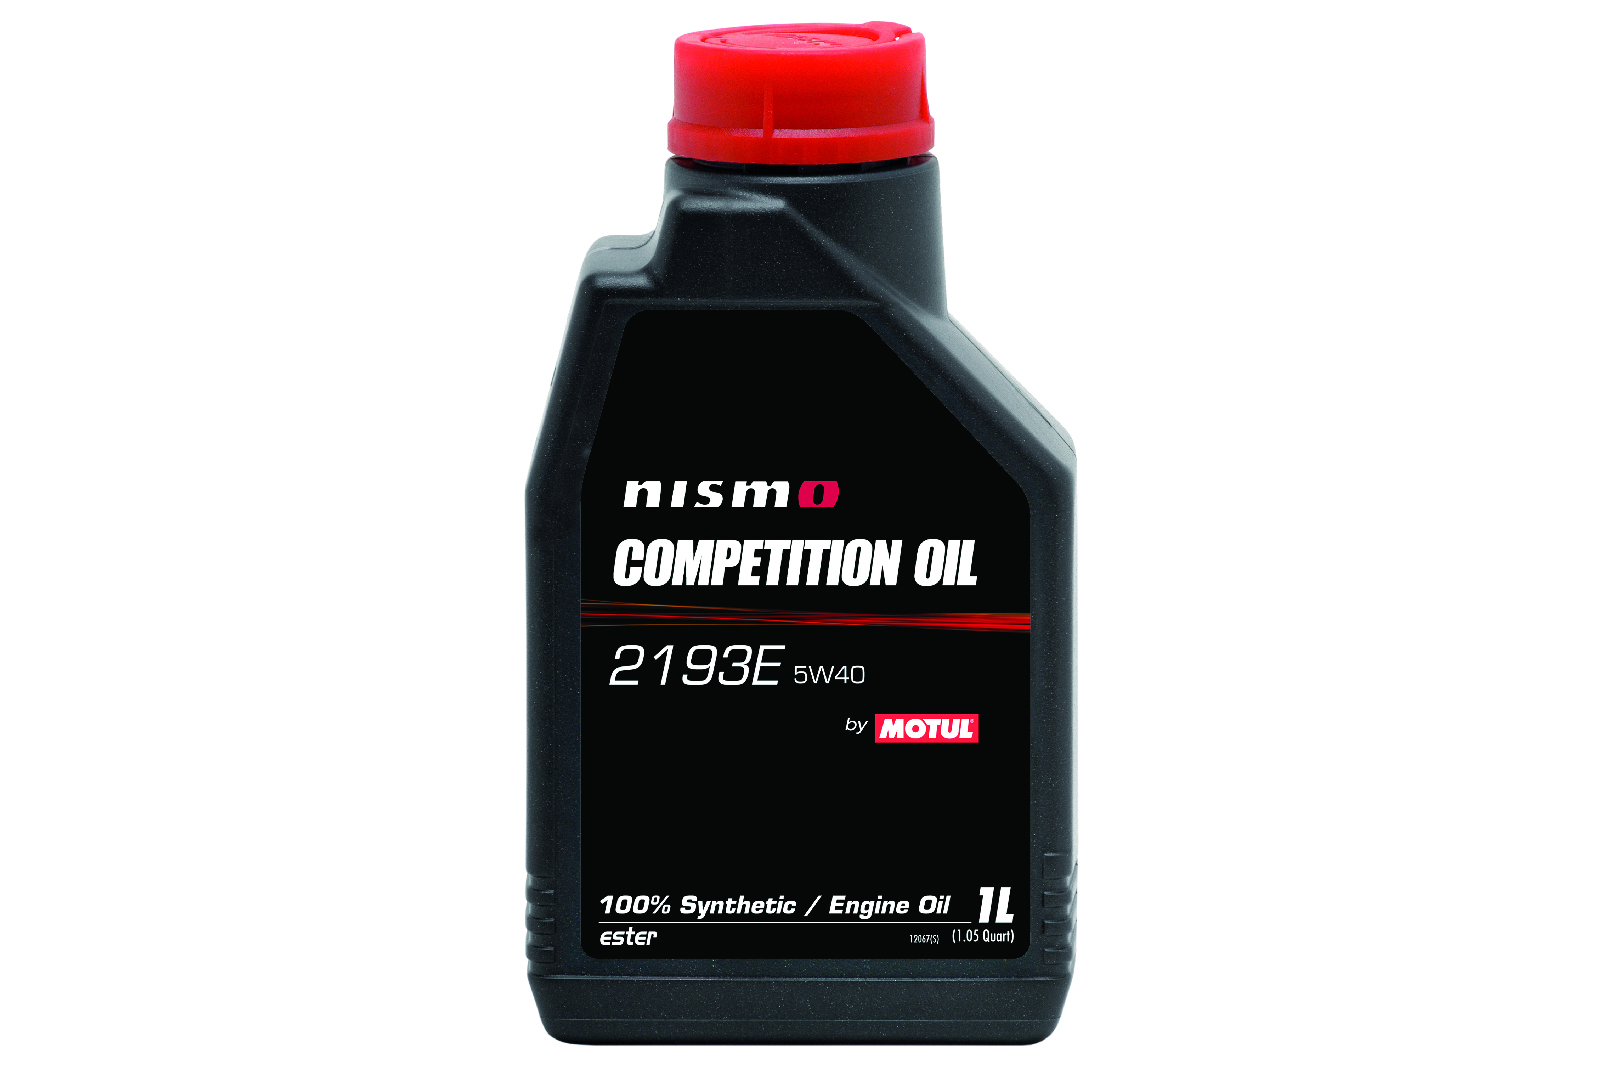 X type масло. Nismo Competition Oil 2193e 5w40. Competition Oil. Motul. Масло Nissan GTR.